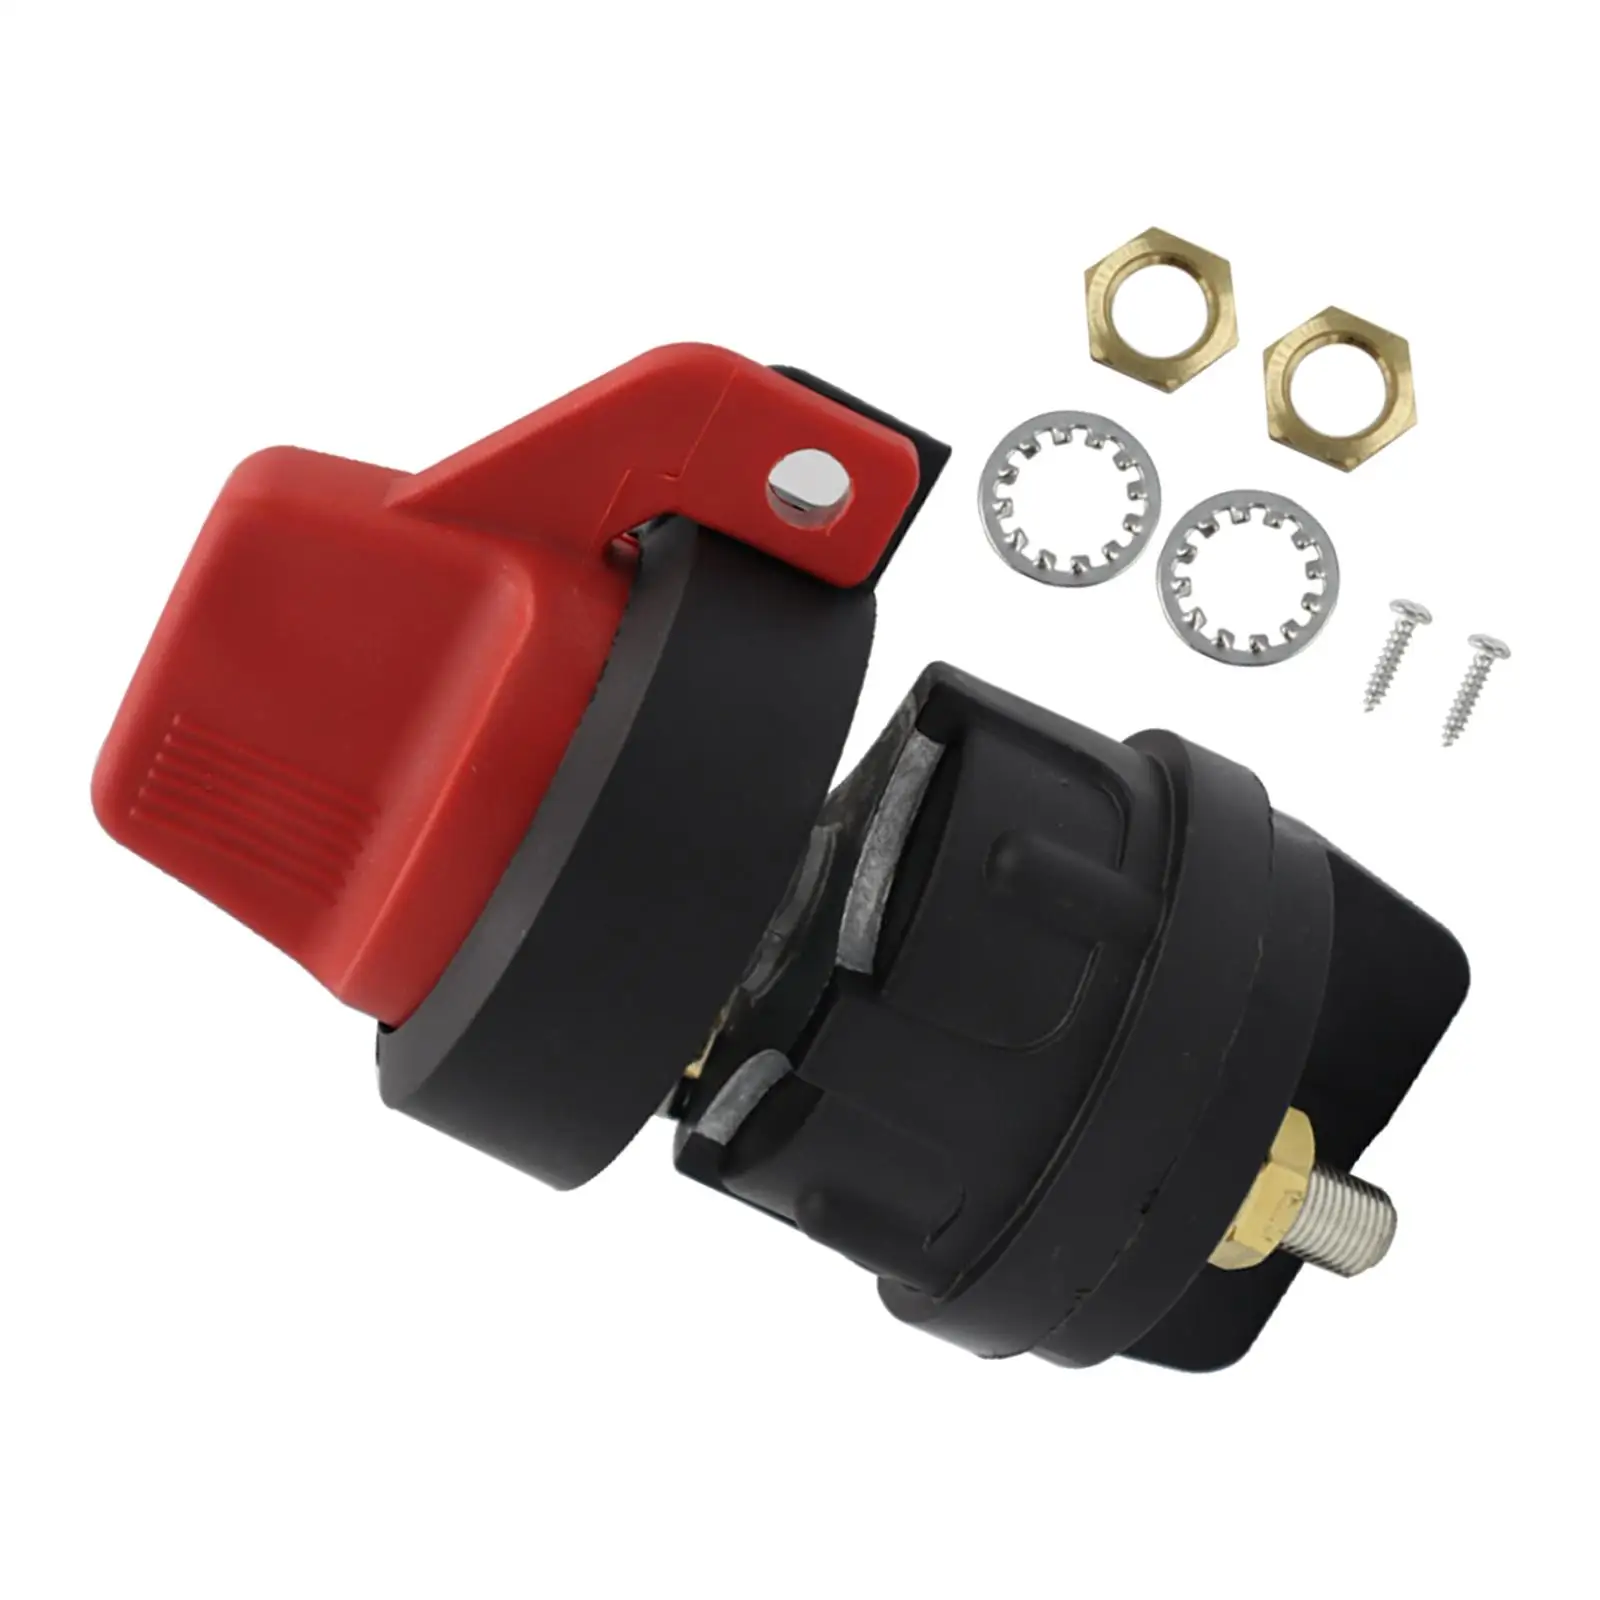 MagiDeal Isolator Lockable 75920 300 Amp Master Disconnect Switch for Vehicles Black/Red Replacement,Built-in Locking High Performance 